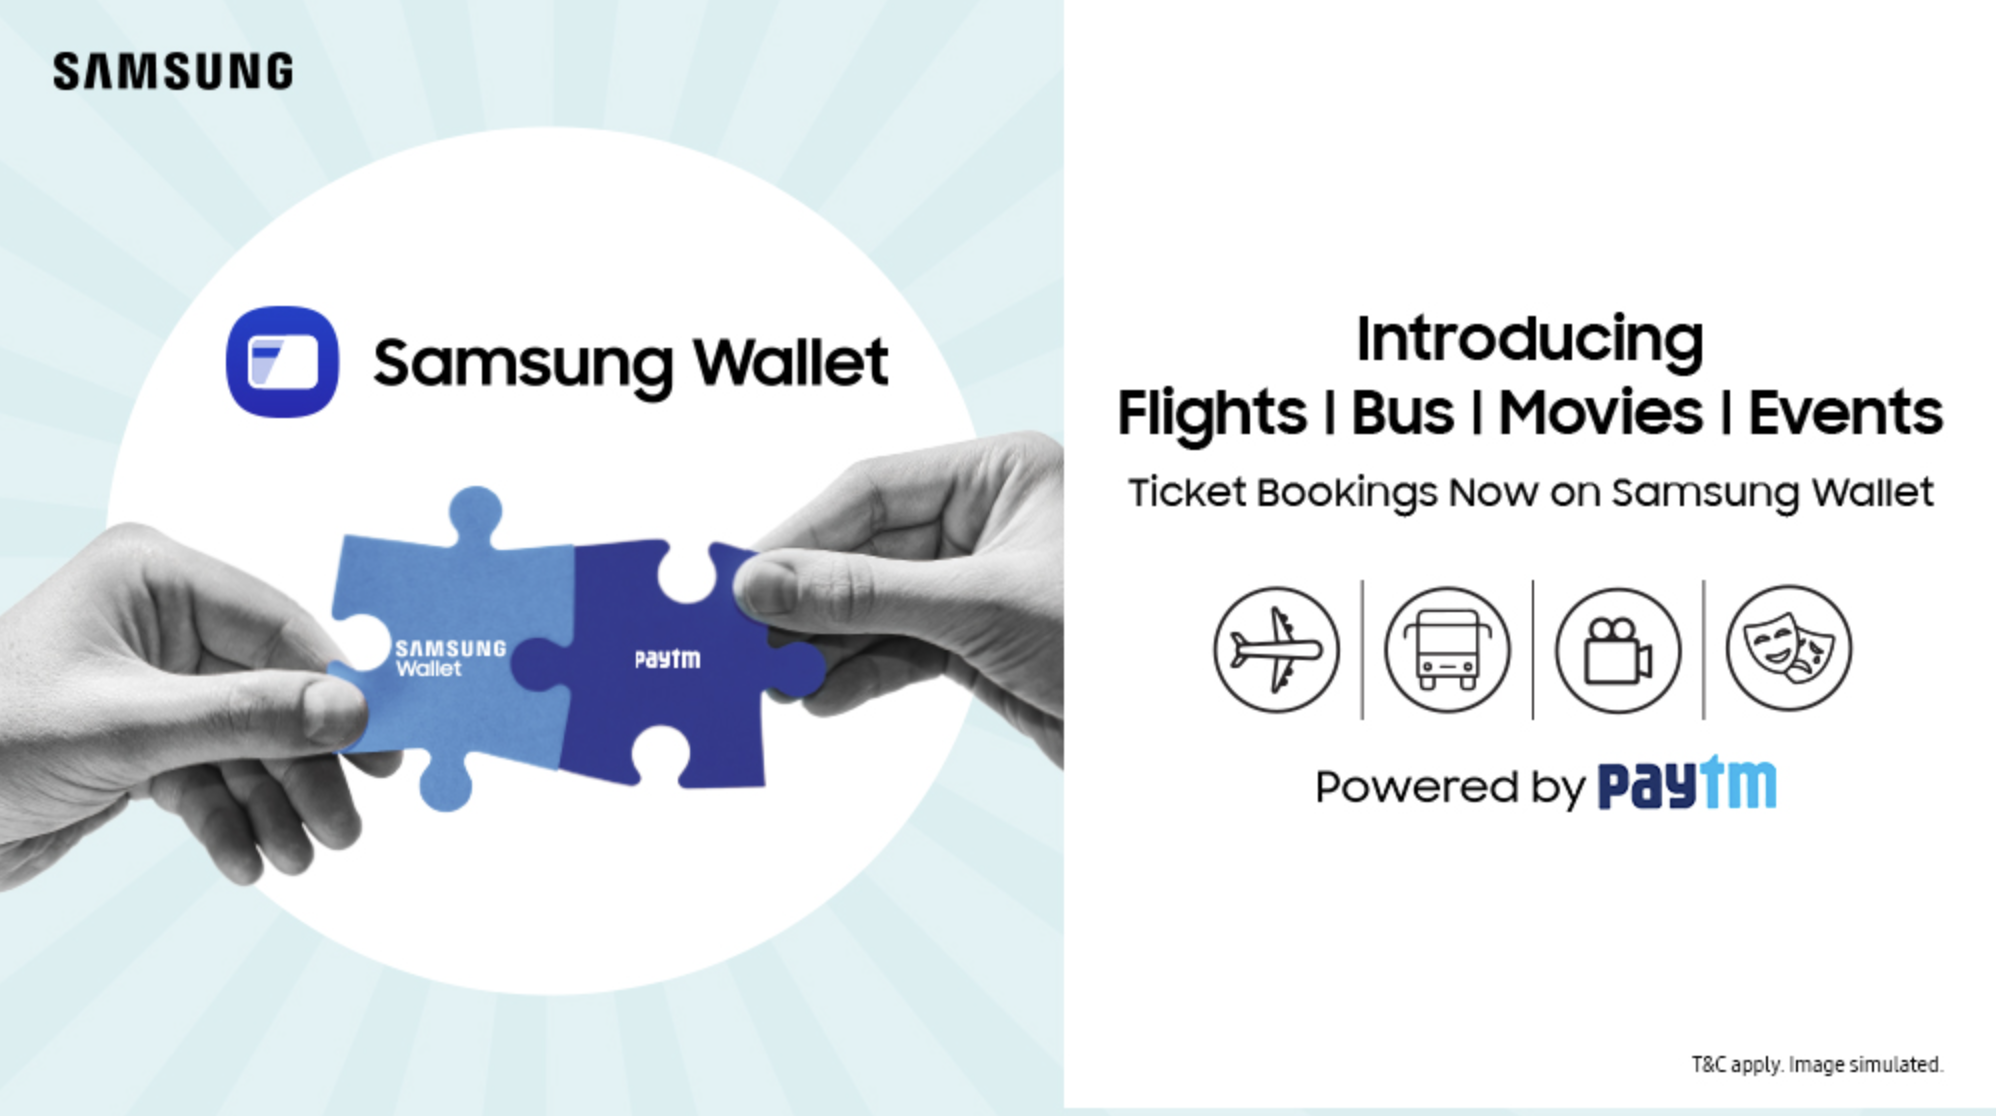 Samsung, Paytm Join Forces For Movie, Bus, Flight Tickets: Rs 1150 Incentives!